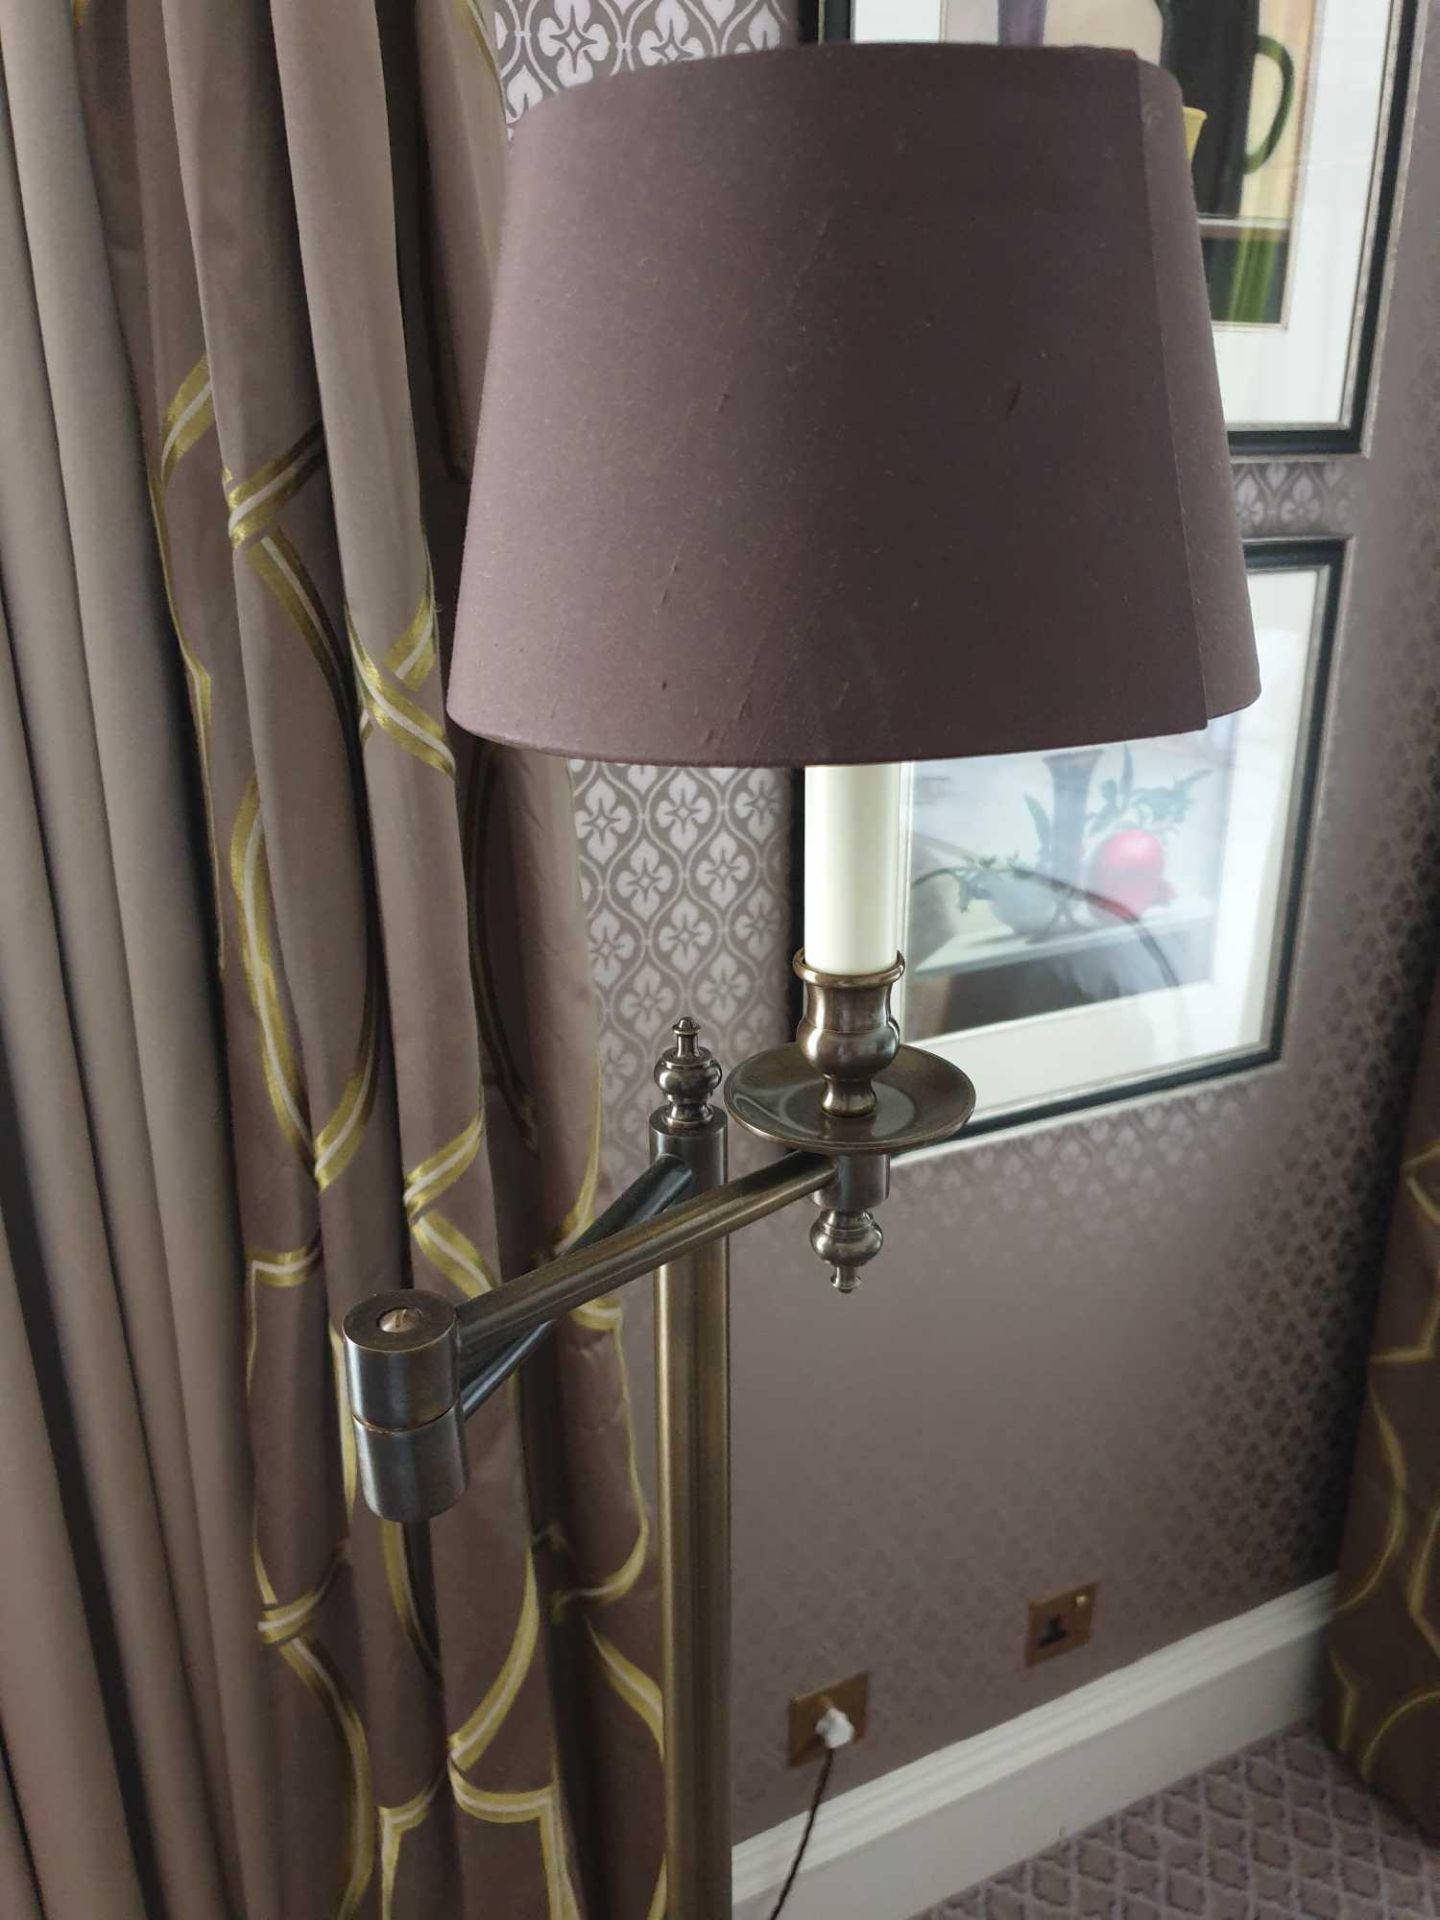 Library Floor Lamp Finished In English Bronze Swing Arm Function With Shade 156cm - Image 2 of 2